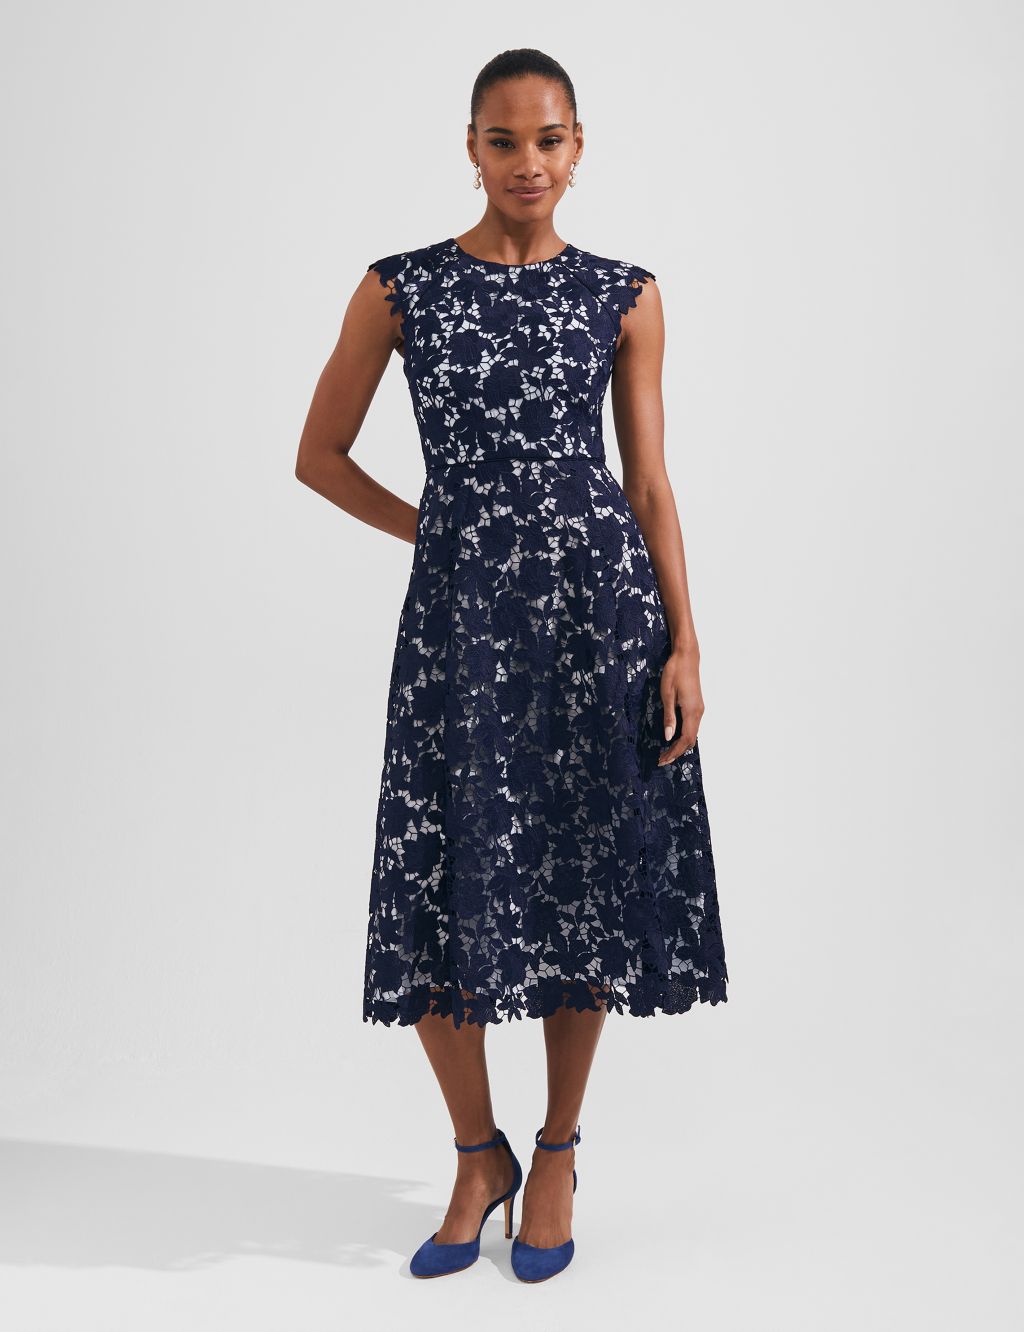 Lace Embroidered Midi Swing Dress image 1